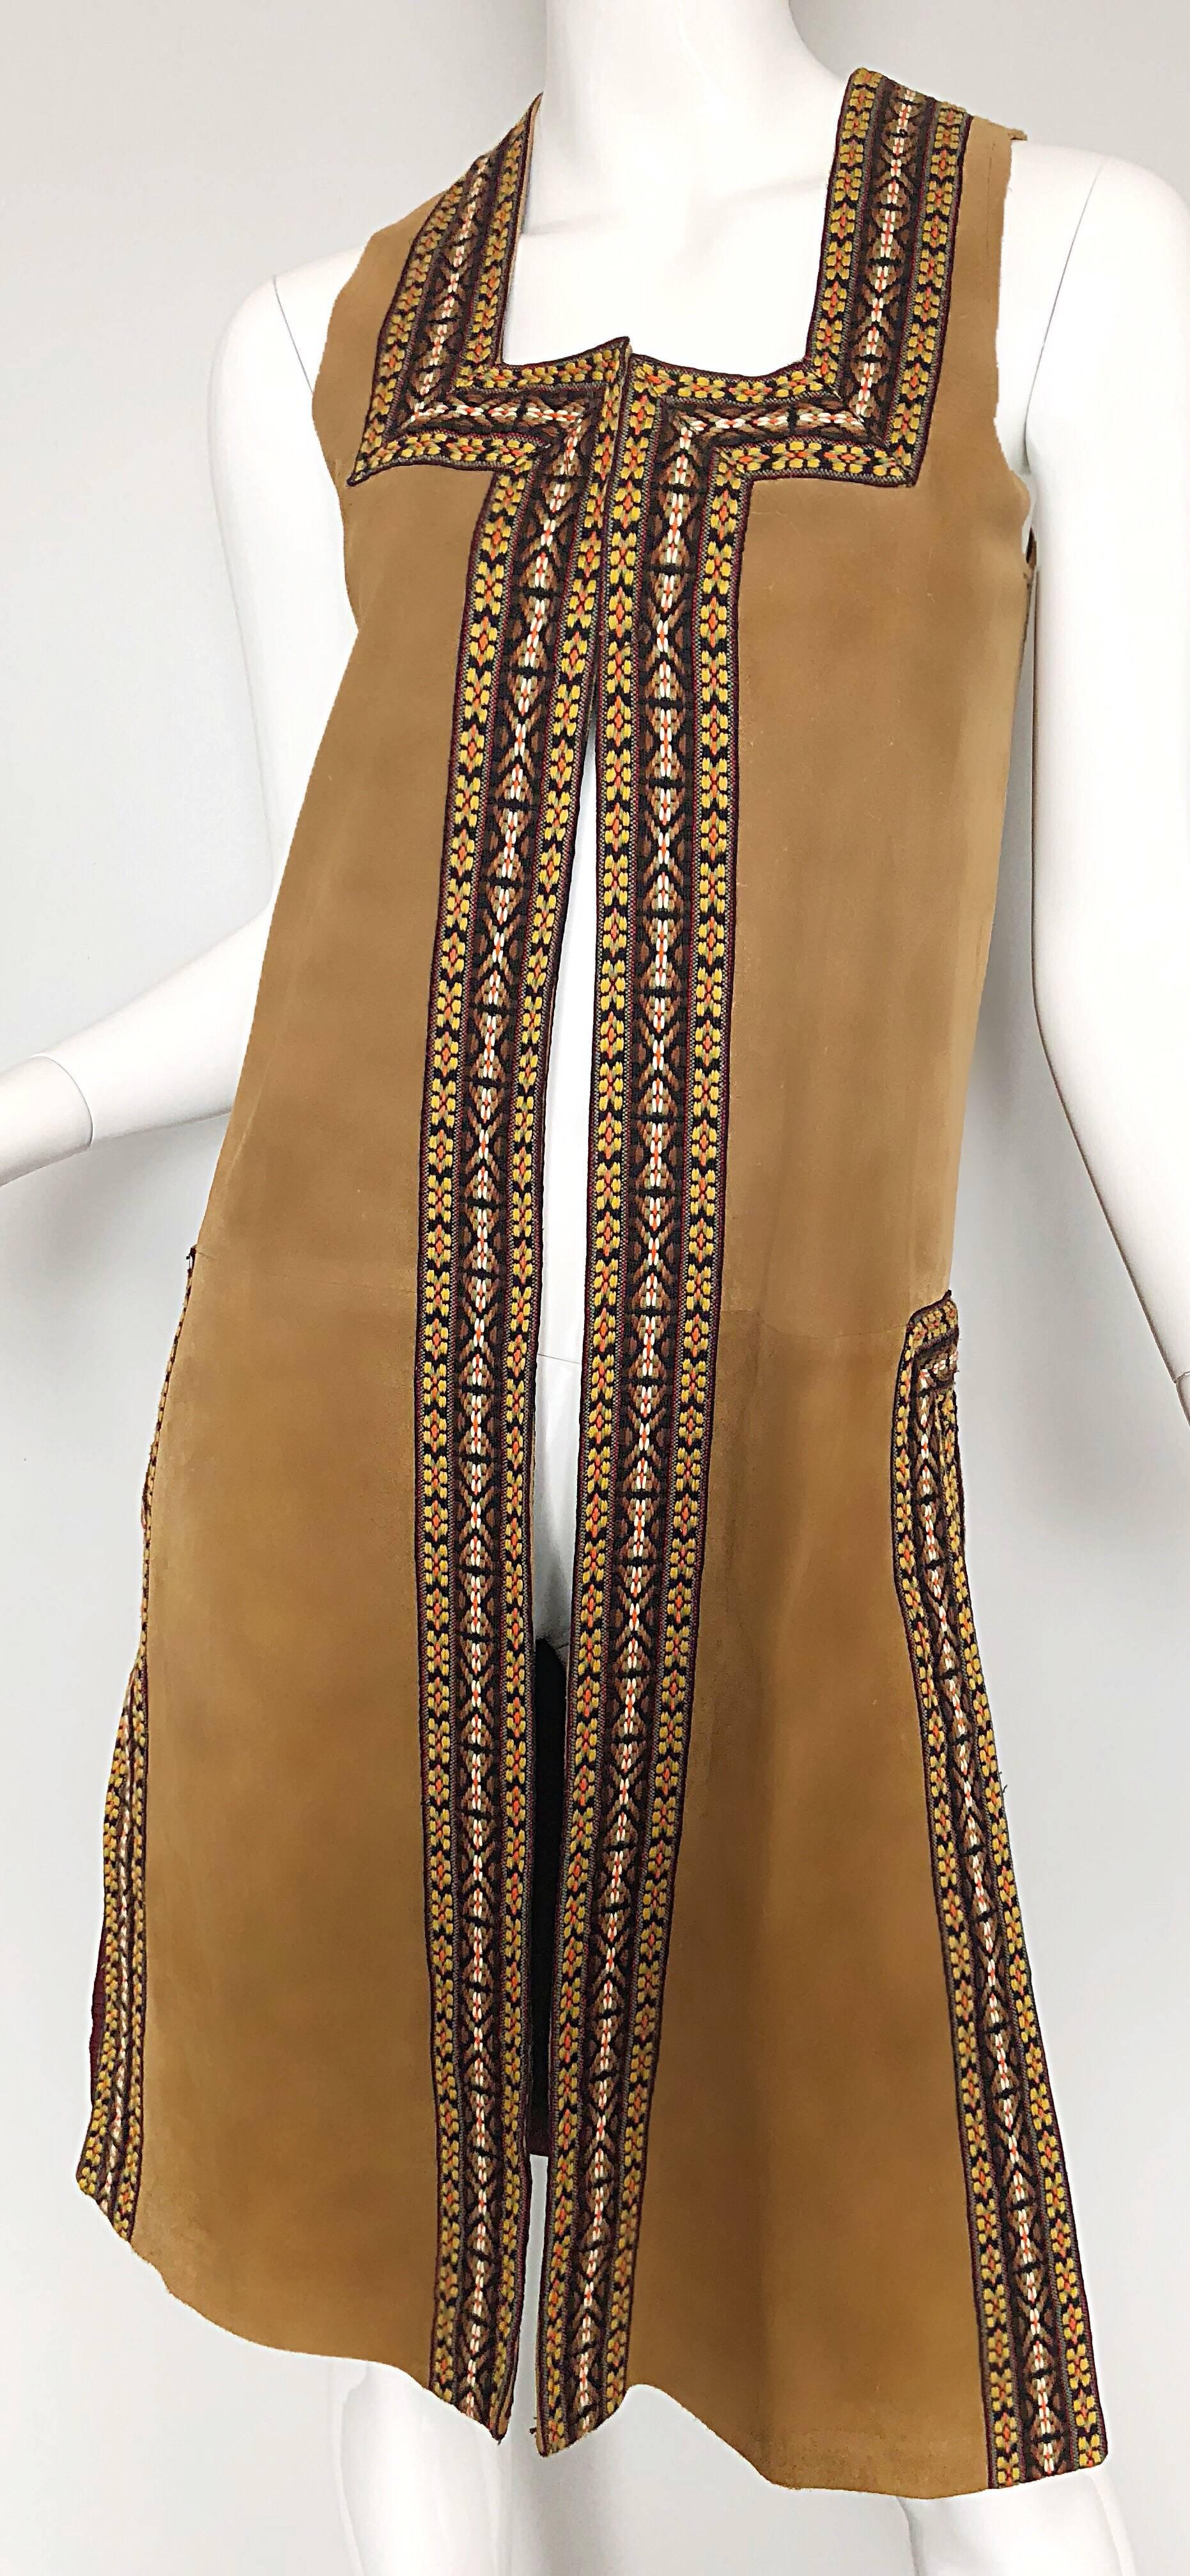 Chic 1970s Tan Suede Leather Embroidered 70s Vintage Boho Sleeveless Vest Jacket For Sale 2